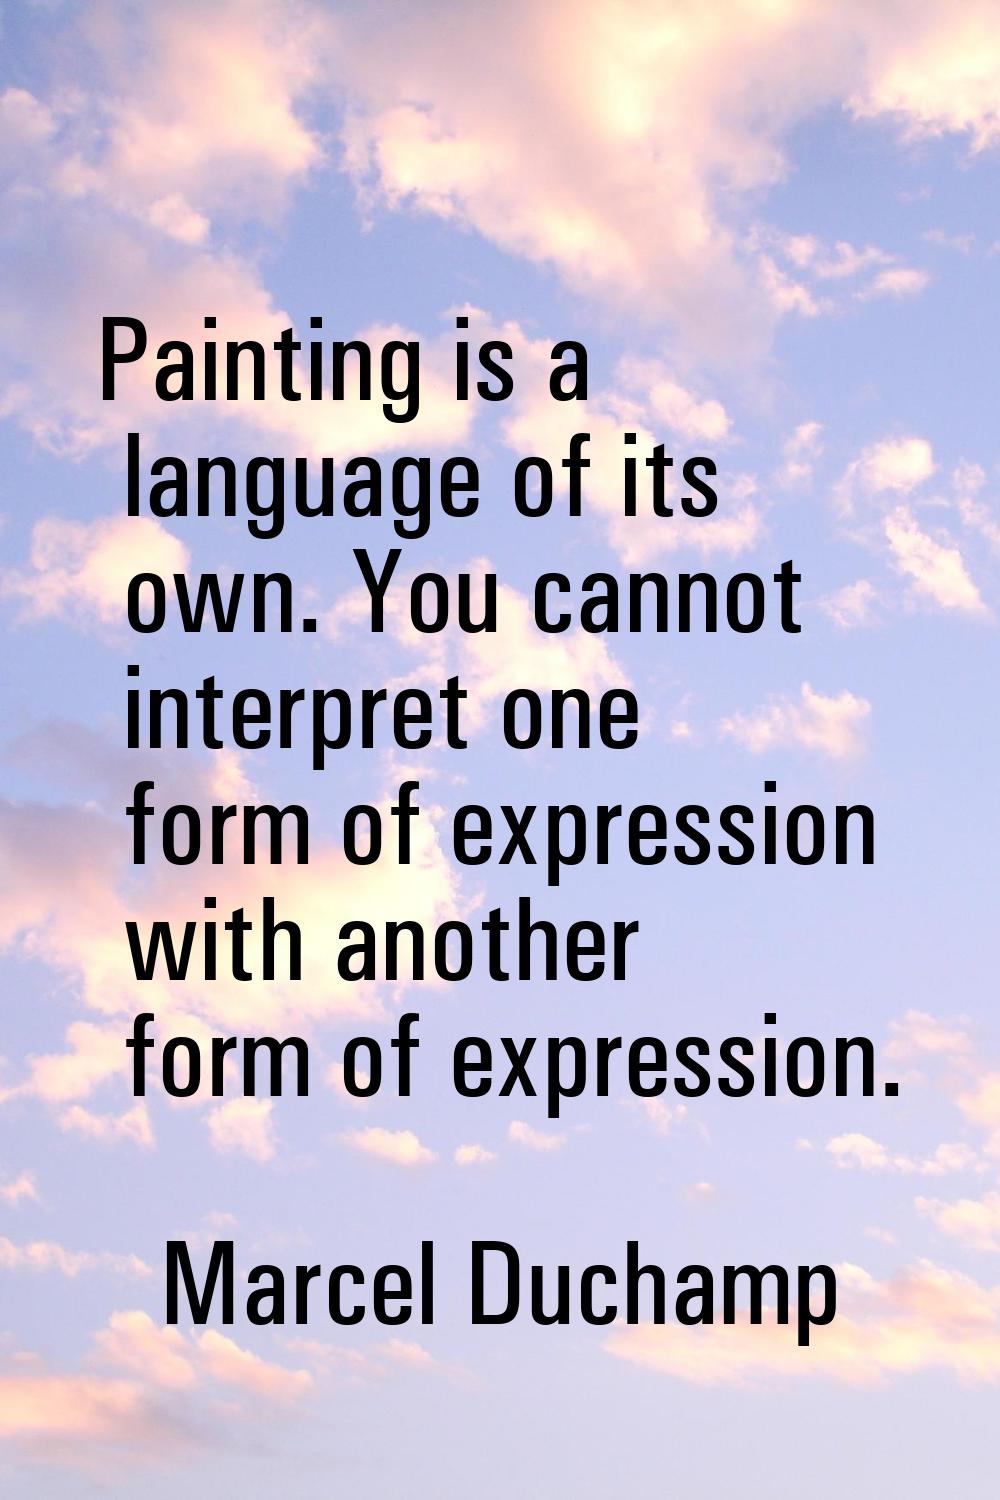 Painting is a language of its own. You cannot interpret one form of expression with another form of